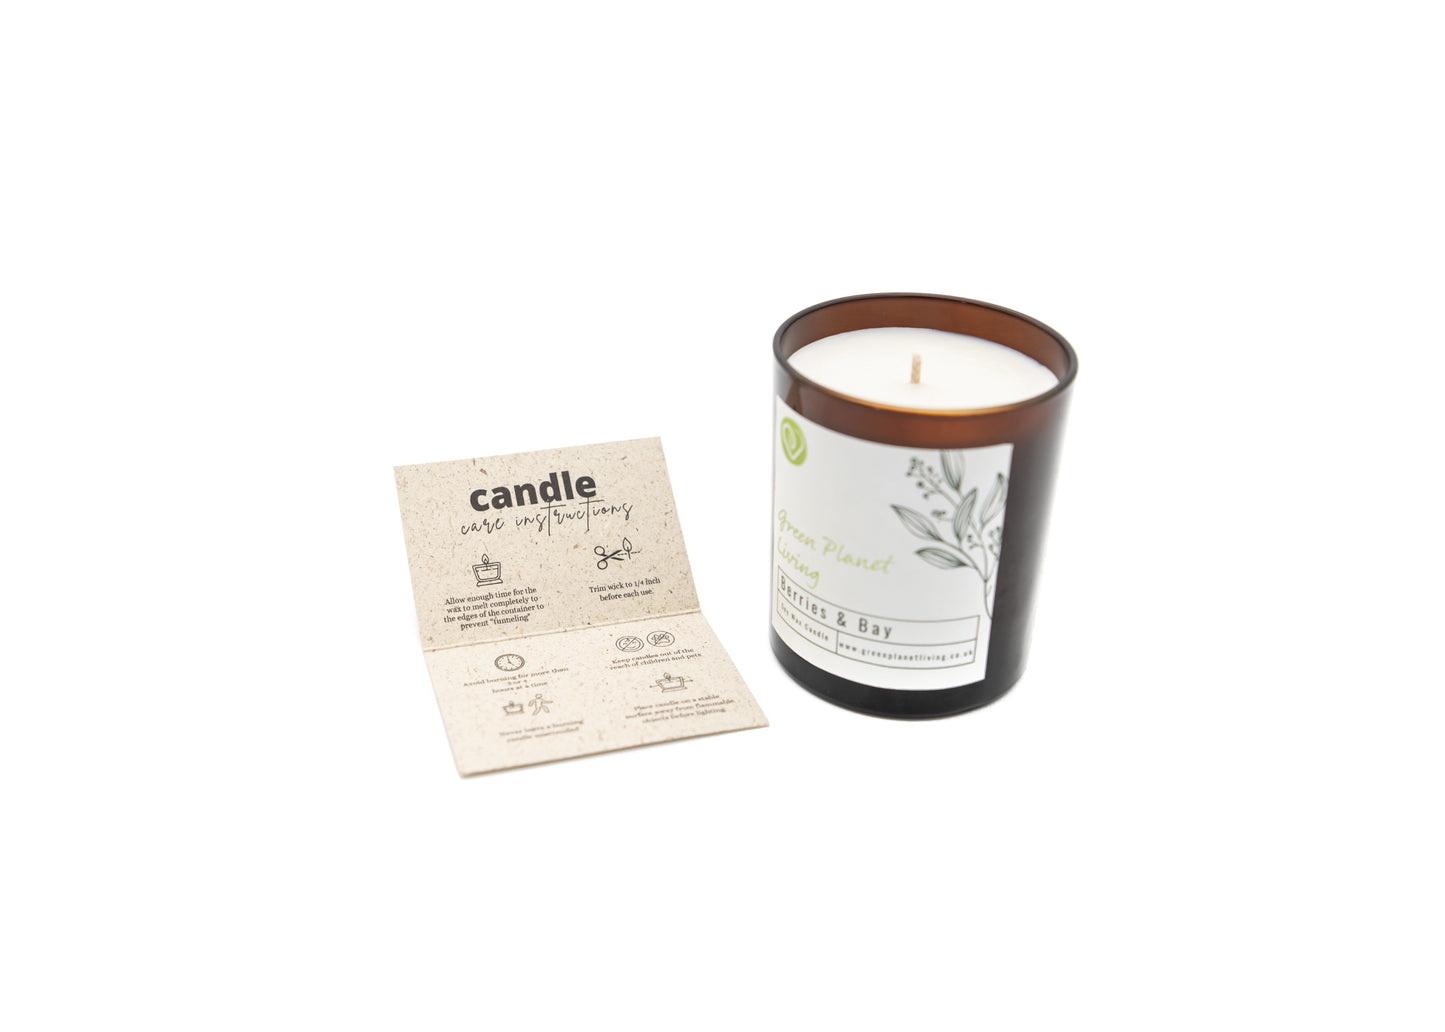 Berries & Bay Candle